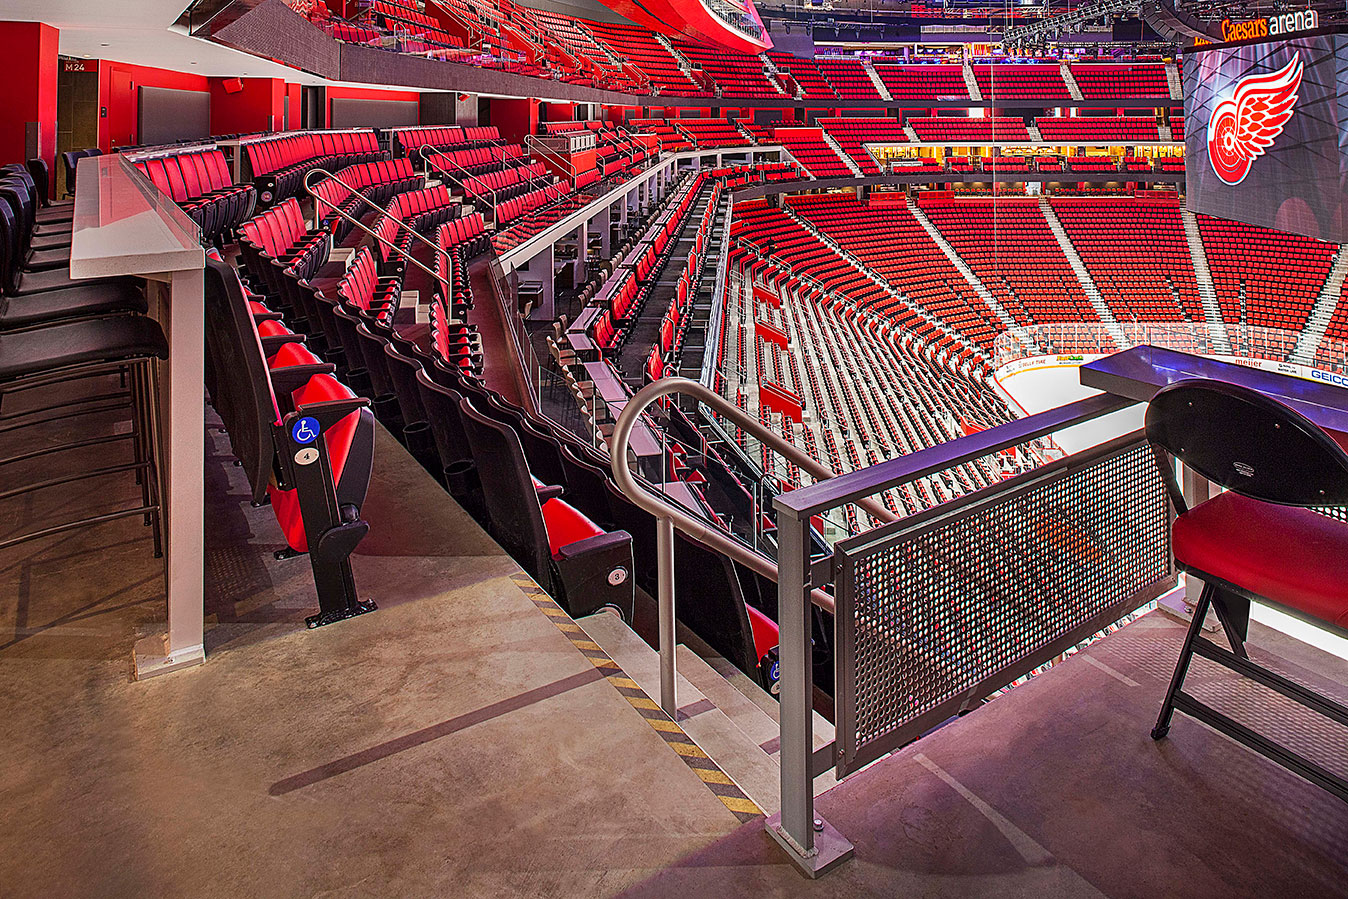 Little Caesars Arena guide: Parking, dining, seating and more